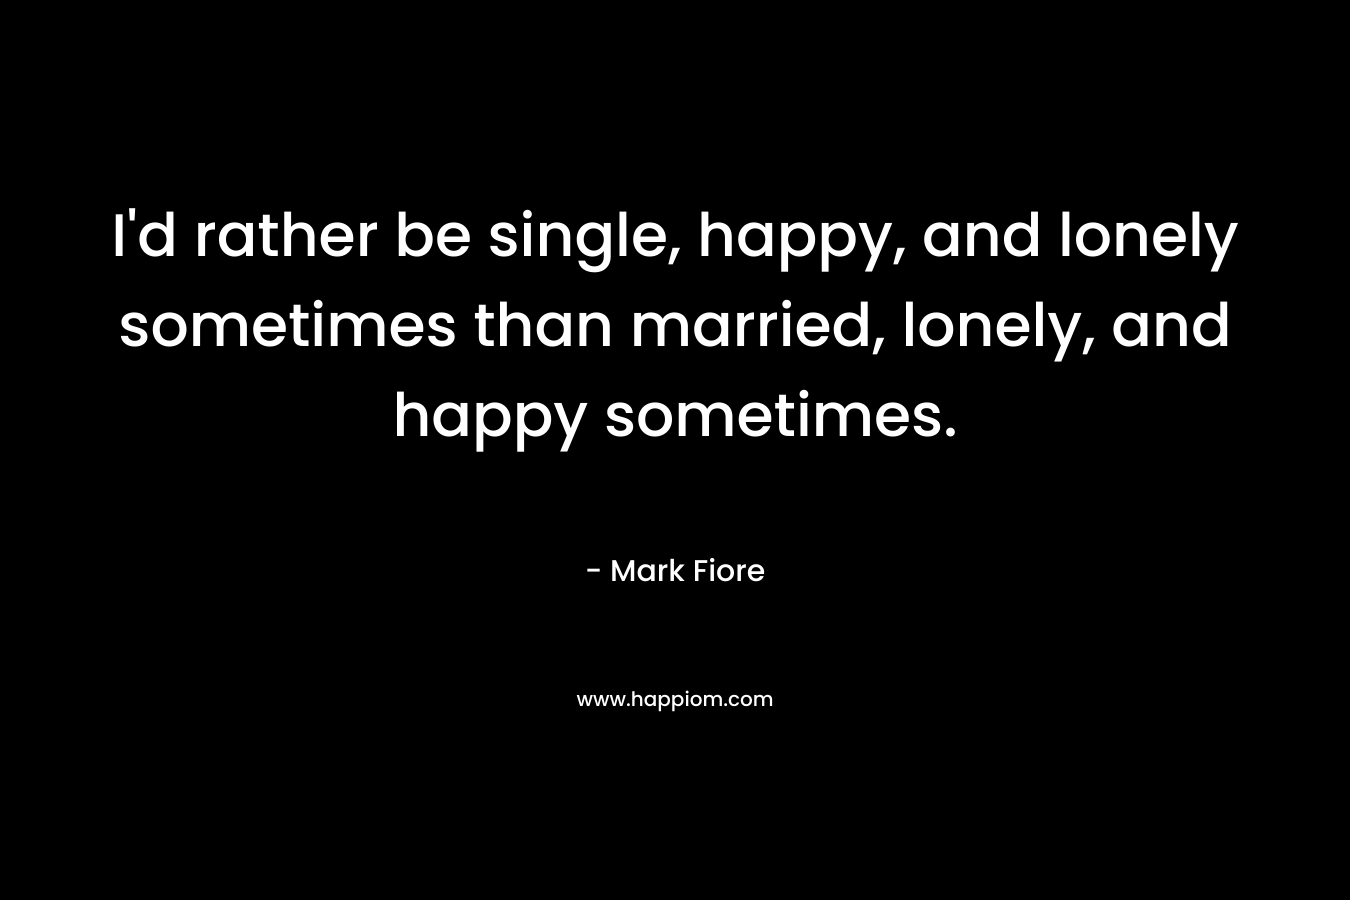 I'd rather be single, happy, and lonely sometimes than married, lonely, and happy sometimes.